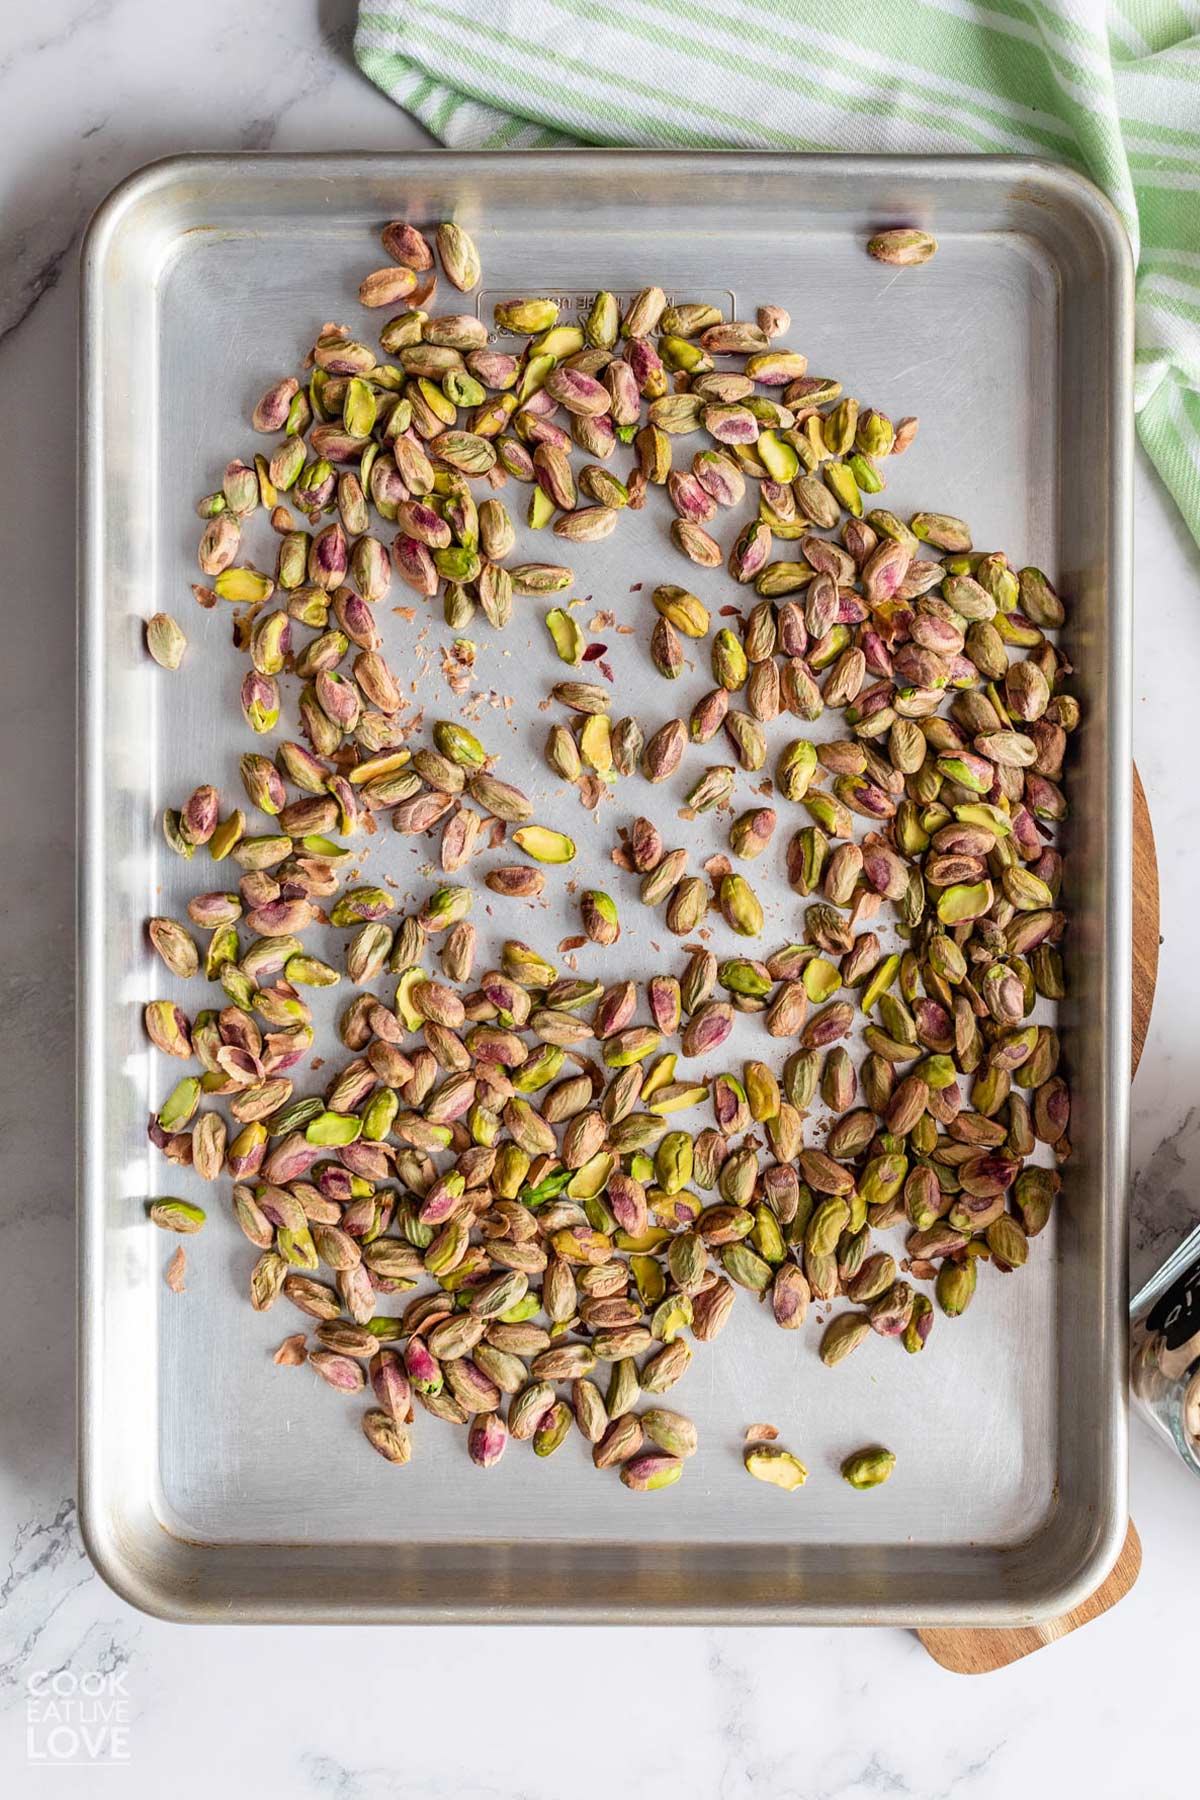 Pistachios on a baking tray.